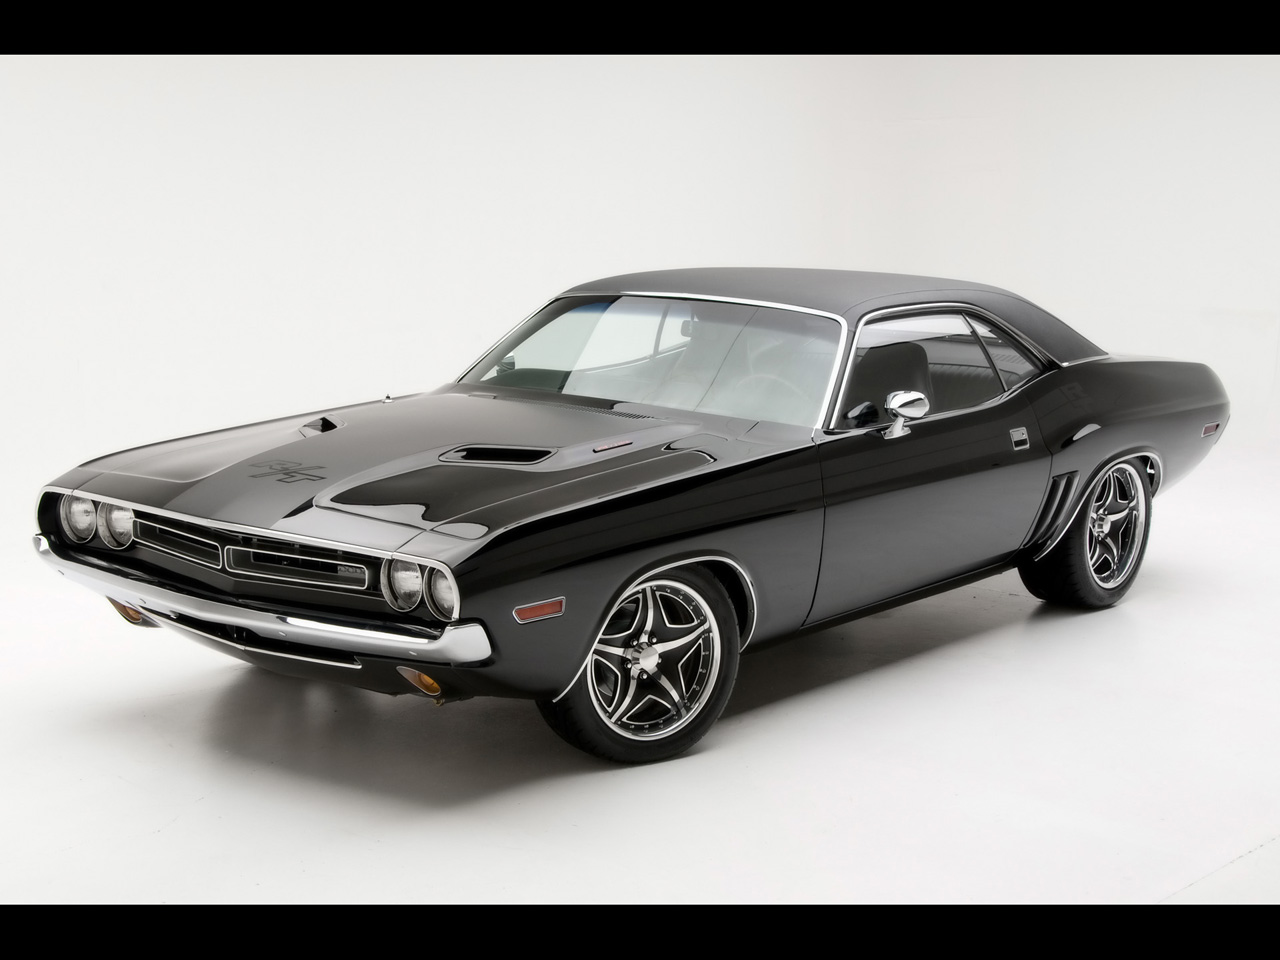 Cool Muscle Cars Wallpaper HD